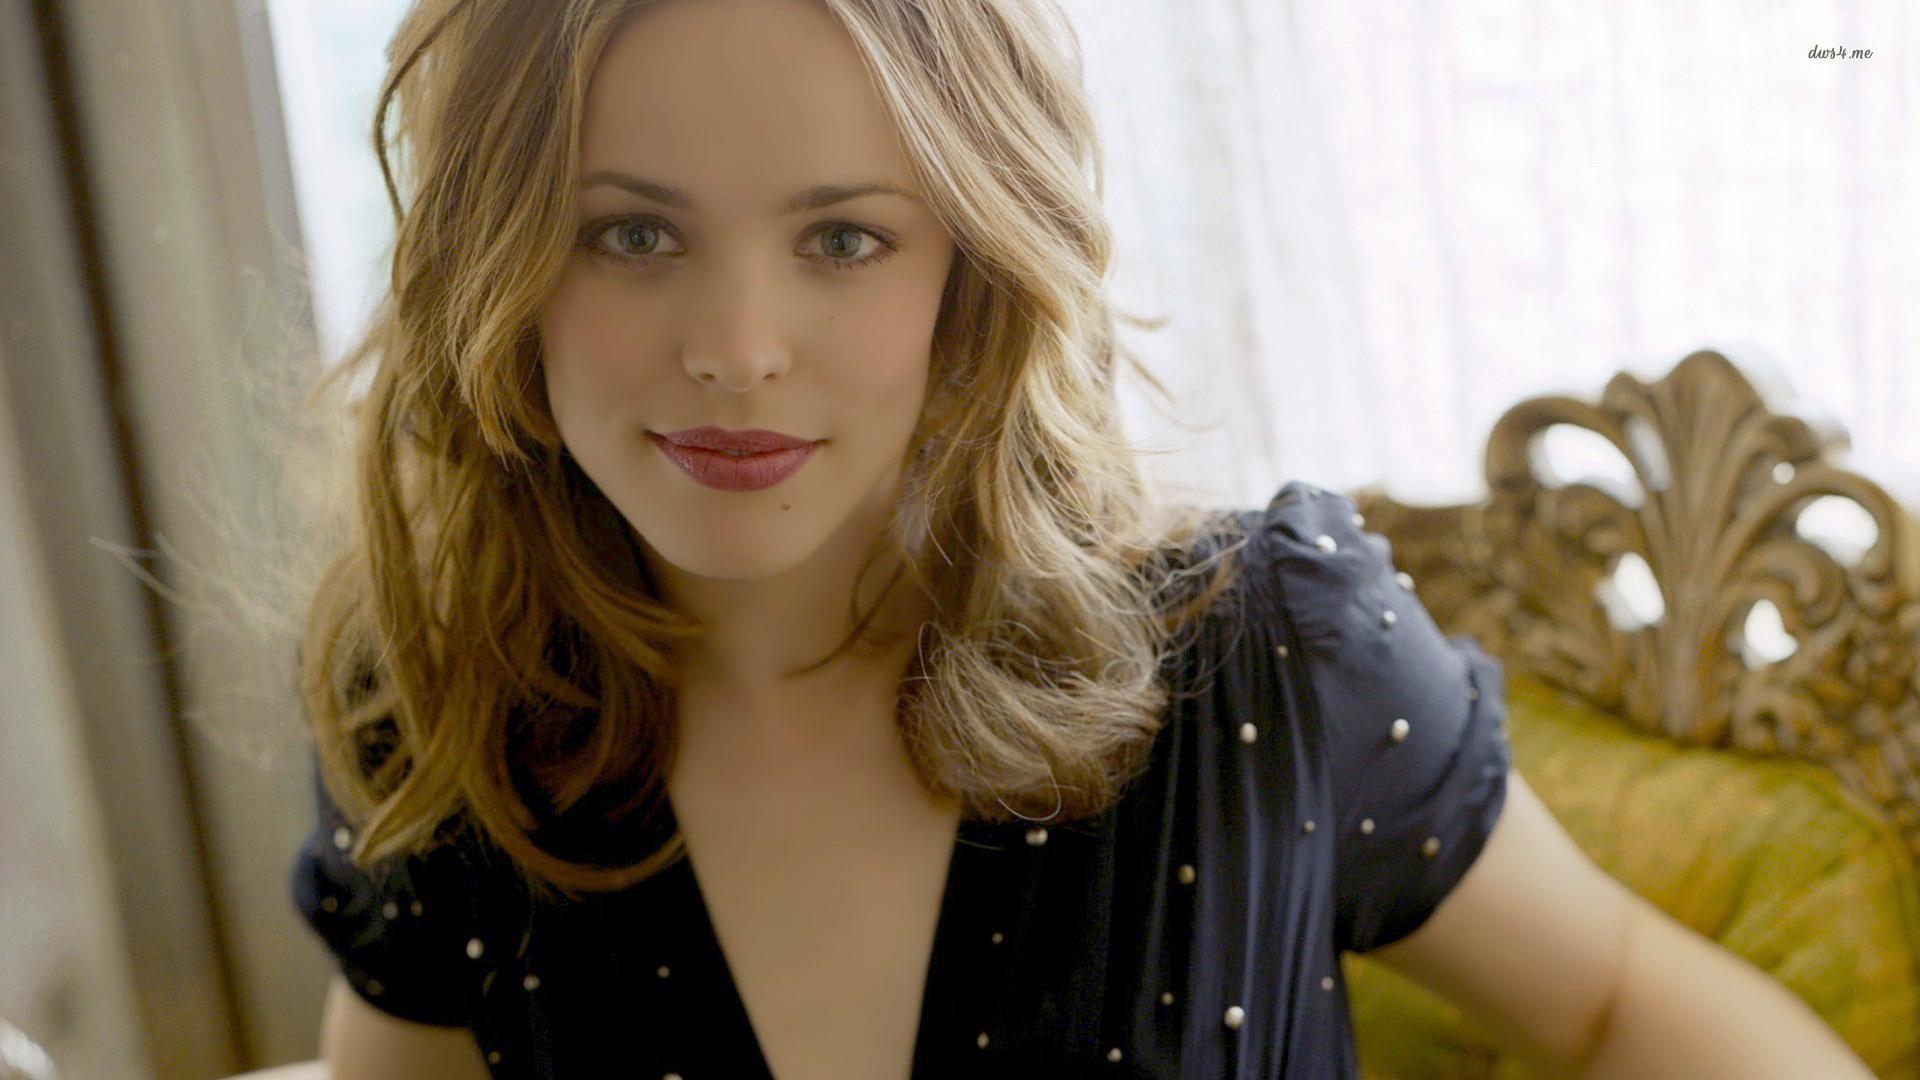 WATCH: Rachel McAdams Talks About Getting High For The First Time